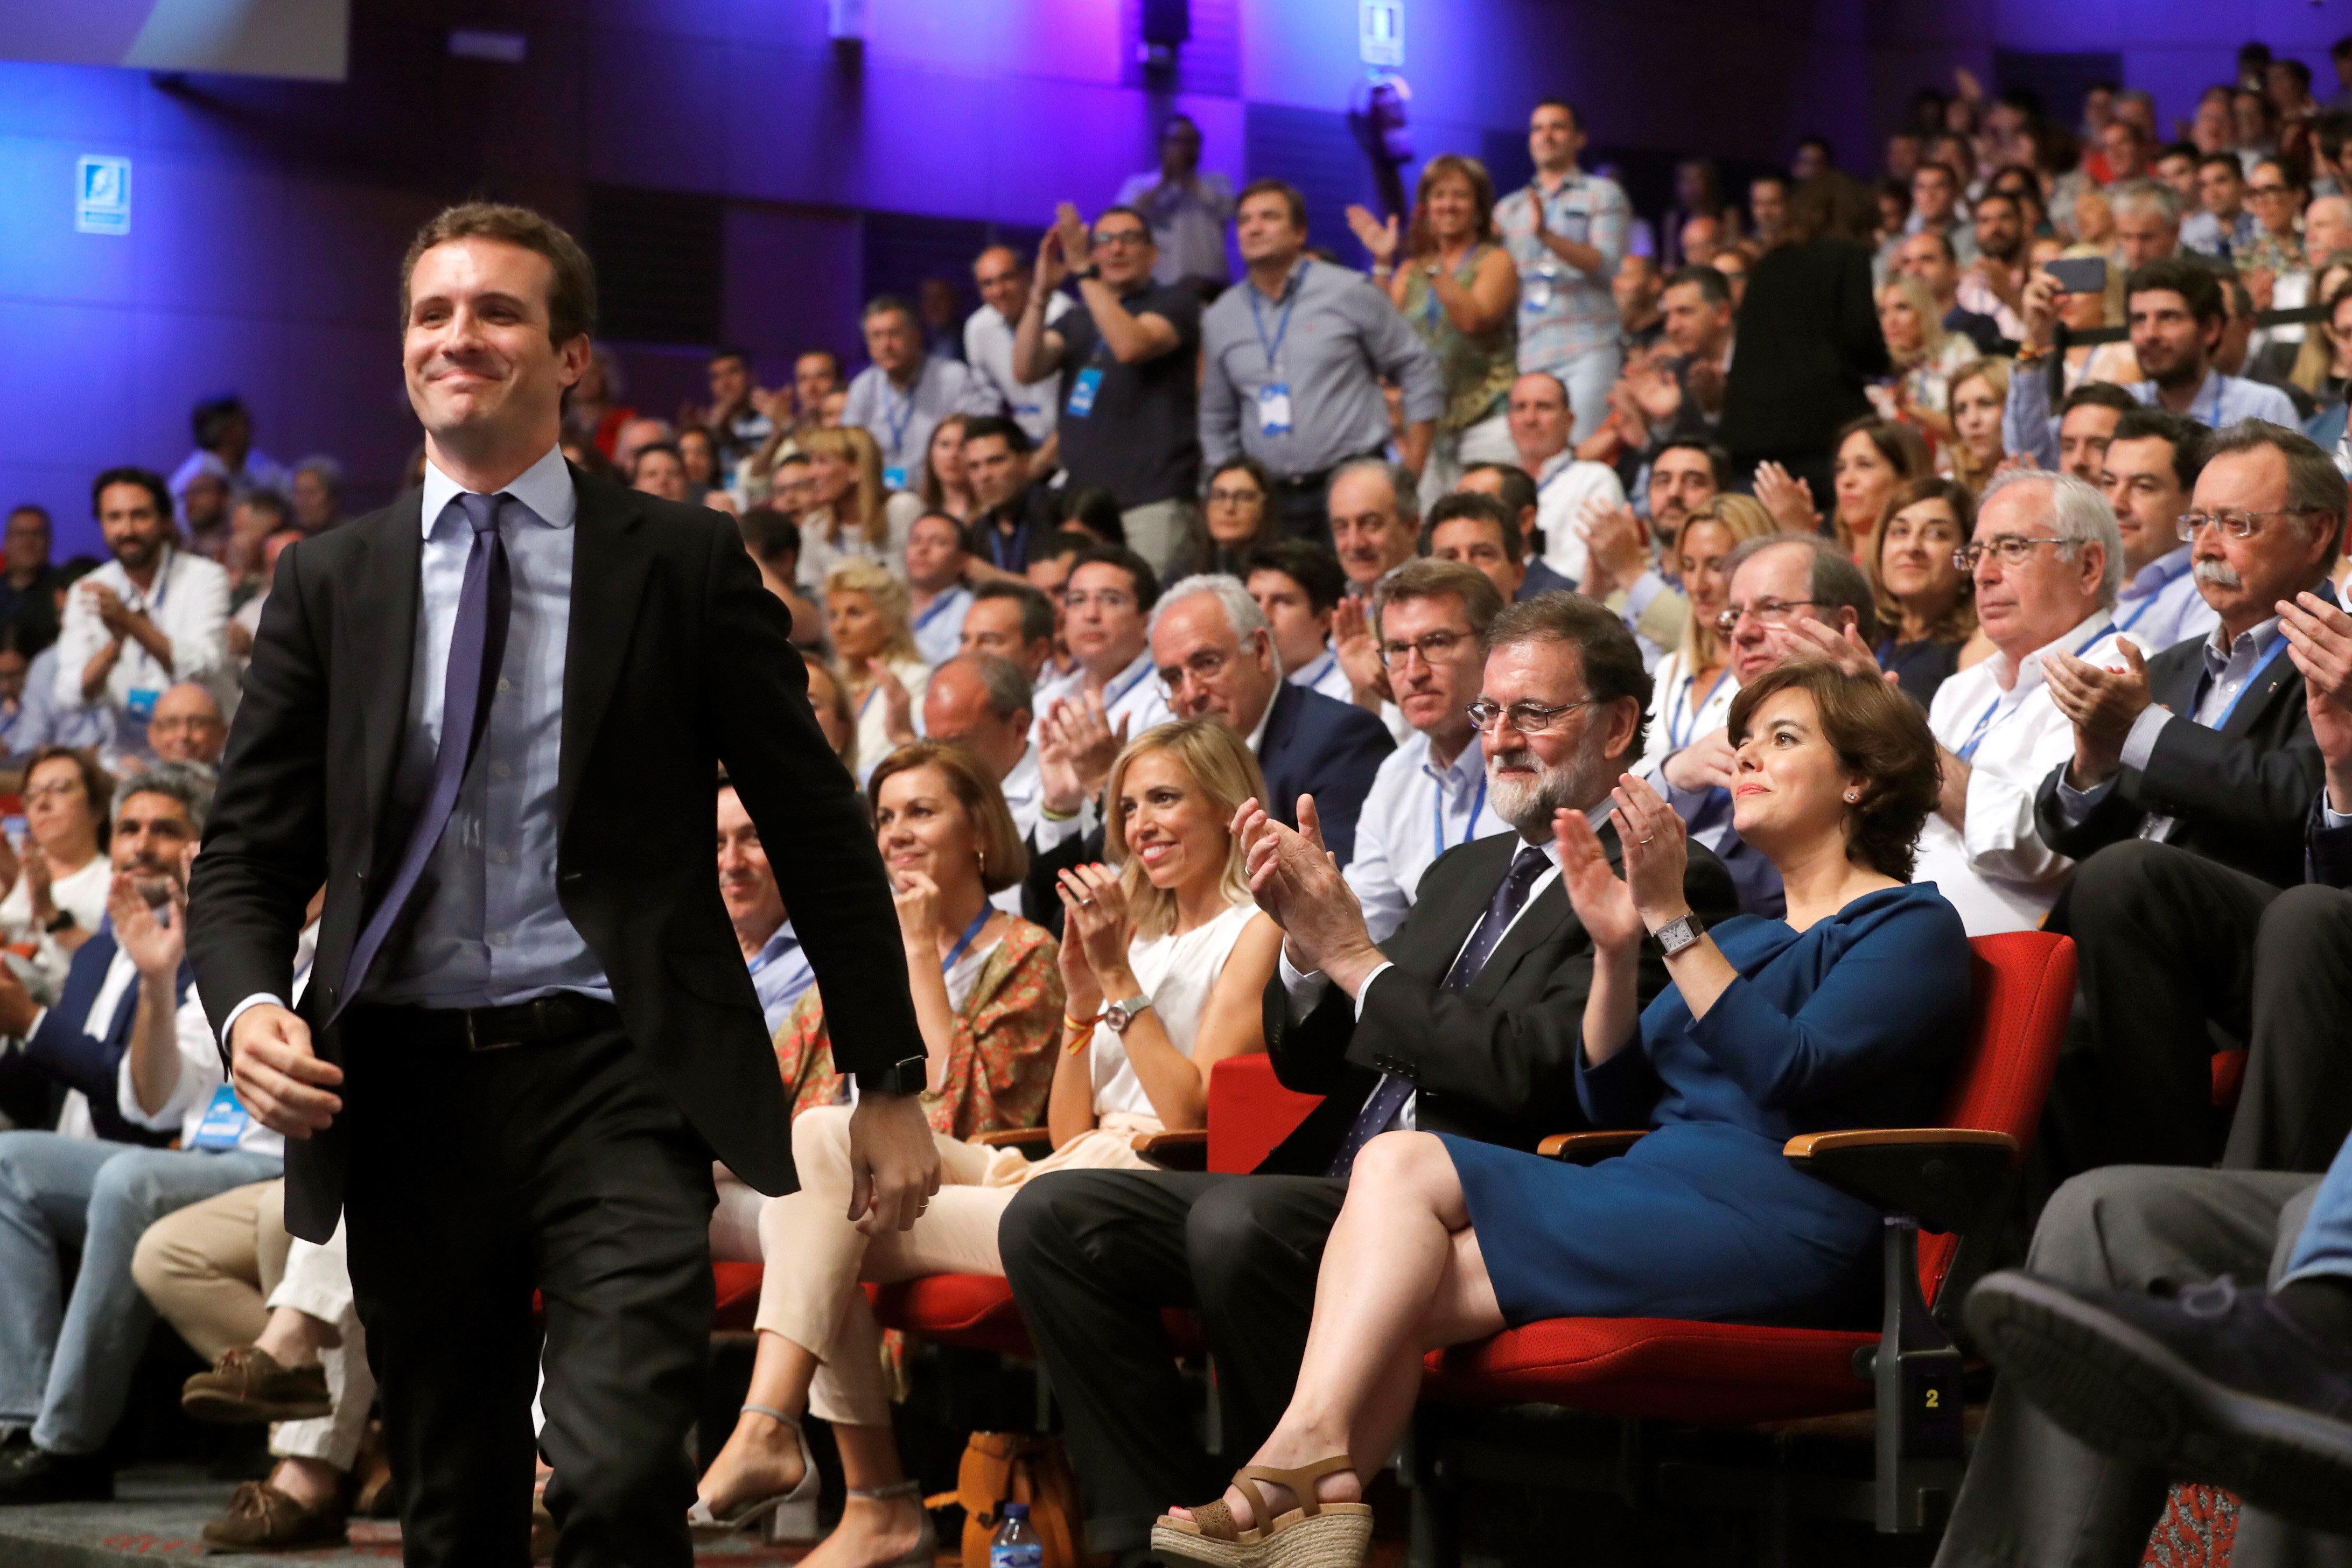 epa06902553 Newly-elected leader of the Spanish conservative People's Party (PP), Pablo Casado (L), reacts during the People's Party (PP) national congress in Madrid, Spain, 21 July 2018. Casado and former deputy Prime Minister Soraya Saenz de Santamaria (R, seated) were both contenders to take over the party's chair from former Prime Minister and outgoing party leader Mariano Rajoy 2-R, seated).  Media reports state that Casado, 37, received a majority of 57 percent of the delegates' votes, while Saenz de Santamaria, gained some 42 percent of the votes of the PP delegates. Others are not identified.  EPA/JUAN CARLOS HIDALGO